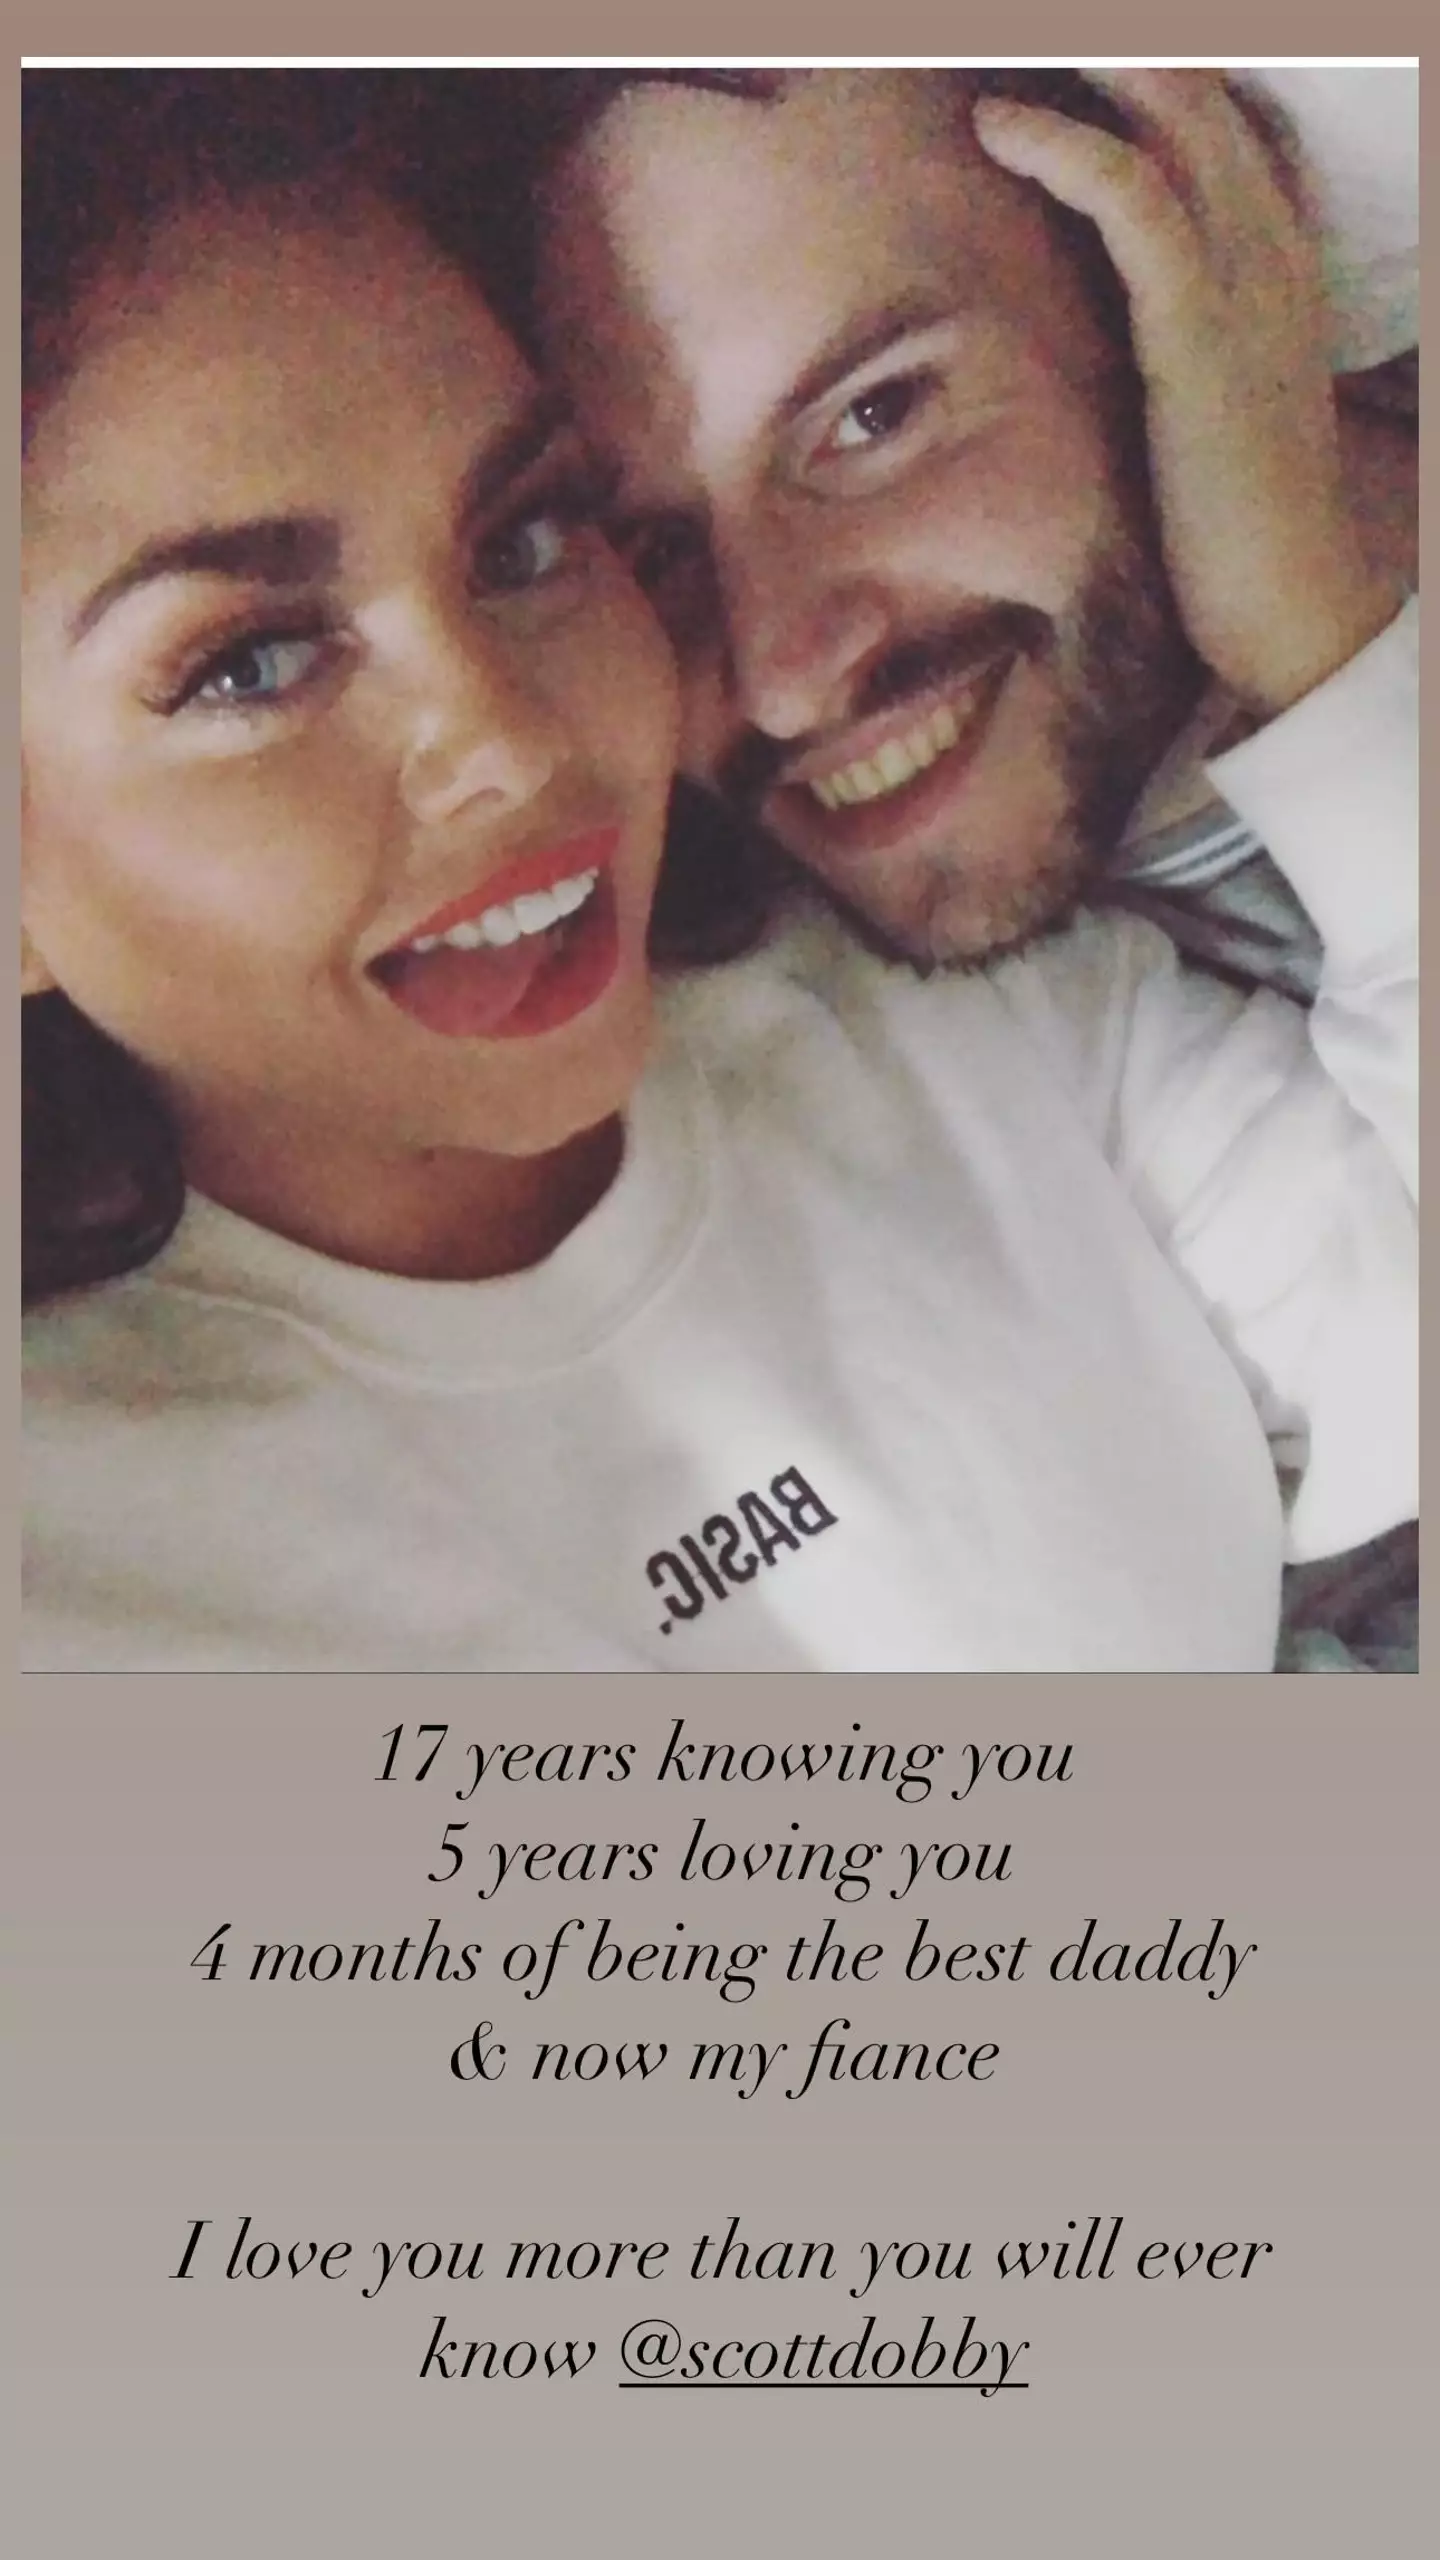 She also posted a sweet tribute to Scott on her Stories.